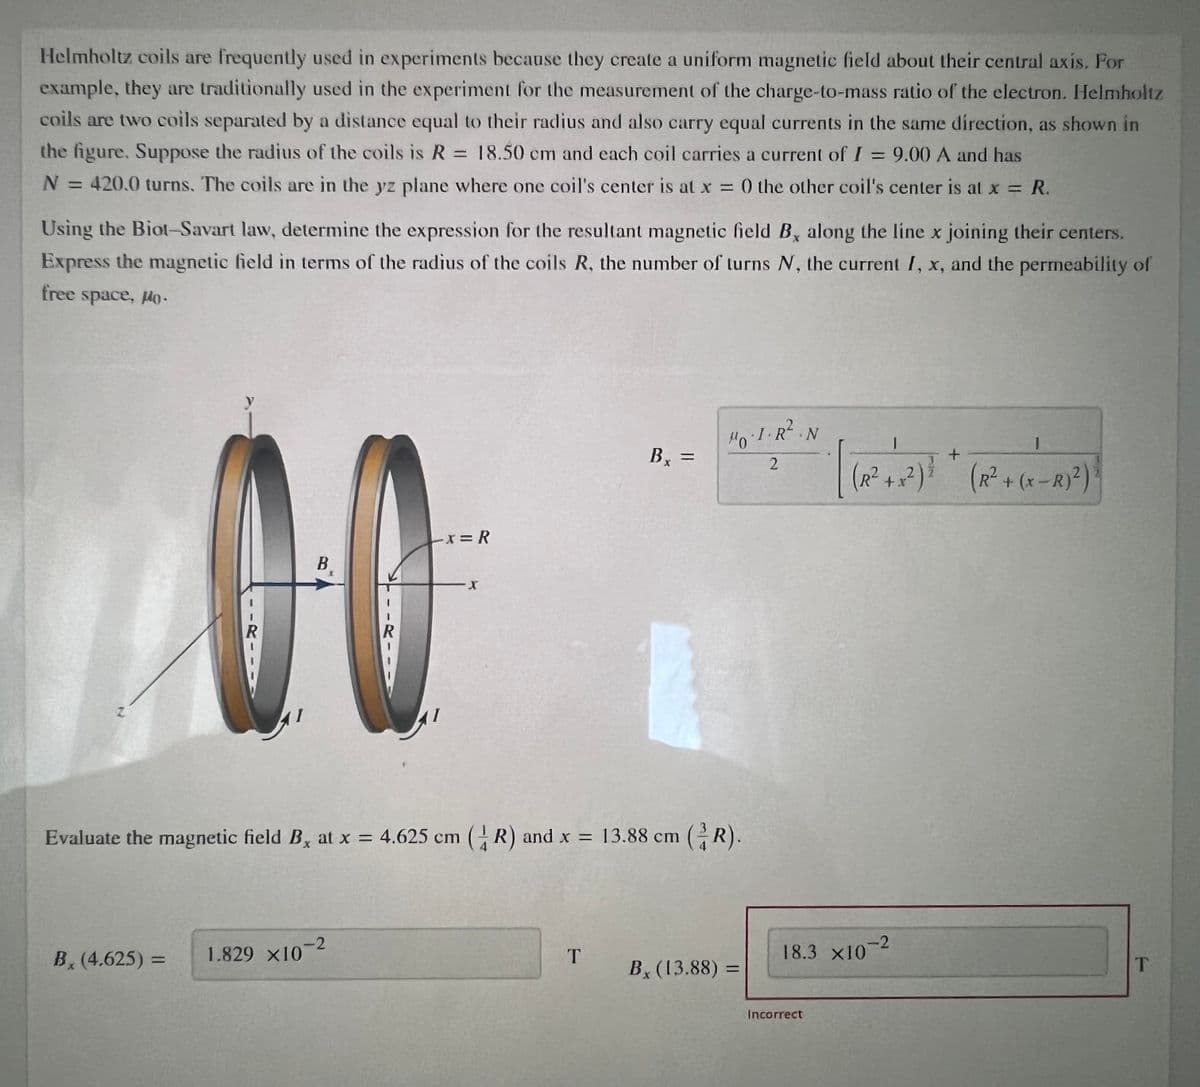 Helmholtz coils are frequently used in experiments because they create a uniform magnetic field about their central axis. For
example, they are traditionally used in the experiment for the measurement of the charge-to-mass ratio of the electron. Helmholtz
coils are two coils separated by a distance equal to their radius and also carry equal currents in the same direction, as shown in
the figure. Suppose the radius of the coils is R = 18.50 cm and each coil carries a current of I = 9.00 A and has
%3D
%3D
N = 420.0 turns. The coils are in the yz plane where one coil's center is at x = 0 the other coil's center is at x = R.
%3D
Using the Biot-Savart law, determine the expression for the resultant magnetic field By along the line x joining their centers.
Express the magnetic field in terms of the radius of the coils R, the number of turns N, the current I, x, and the permeability of
free space, lo.
H0-1.R.N
Bx =
%3D
(R²+x²)*
(R²+(x-R)²)
Ex= R
B
X.
Evaluate the magnetic field B, at x = 4.625 cm (R) and x = 13.88 cm (R).
1.829 ×10-2
18.3 X10-2
B, (4.625) =
T
B (13.88) =
Incorrect
